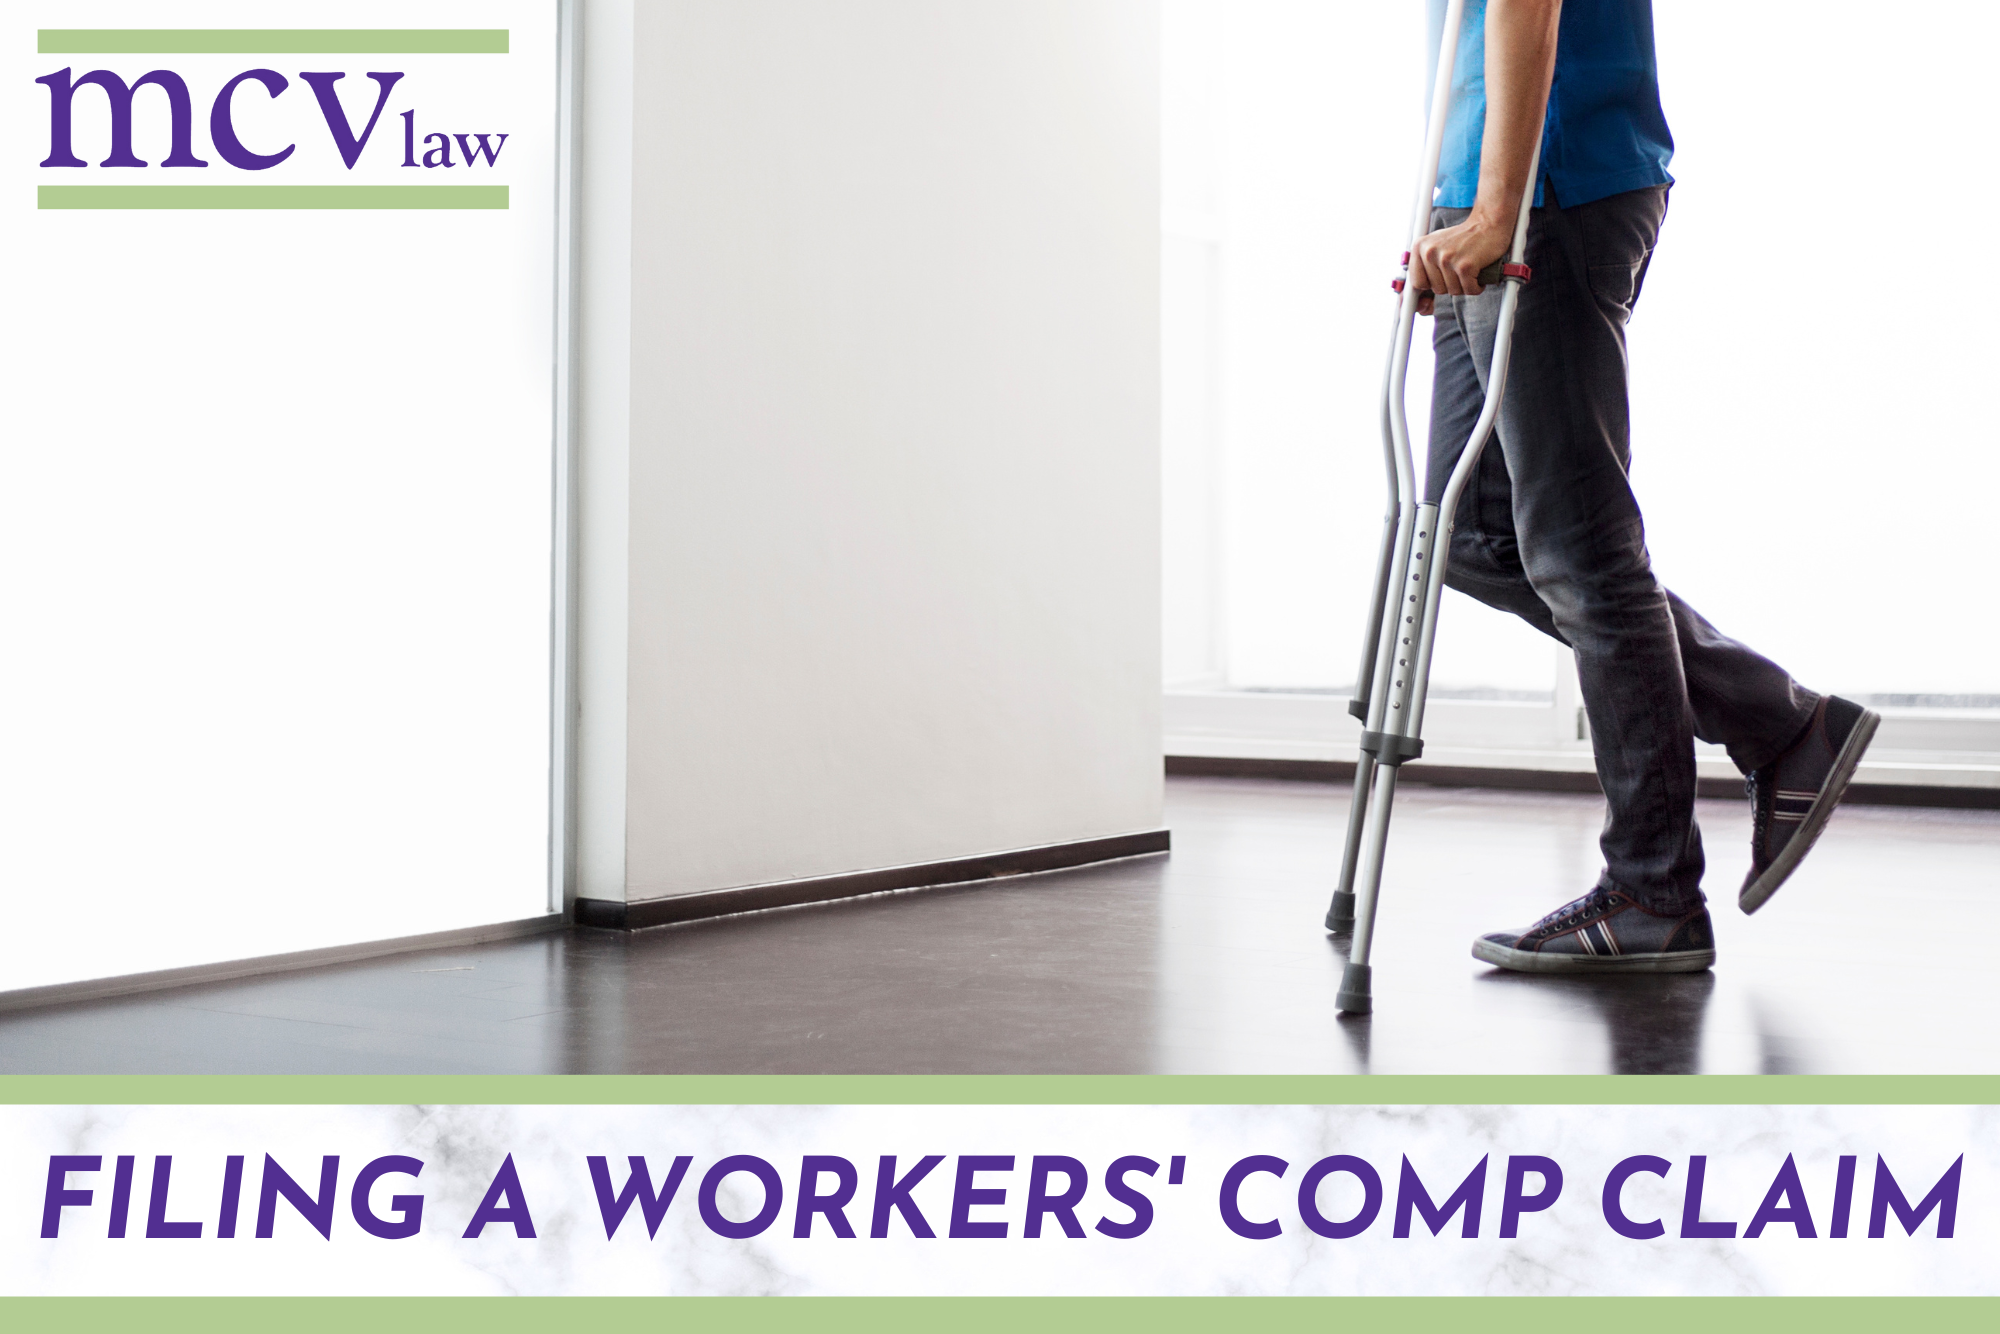 Image for Blog on New York State Workers' Comp Claim Process